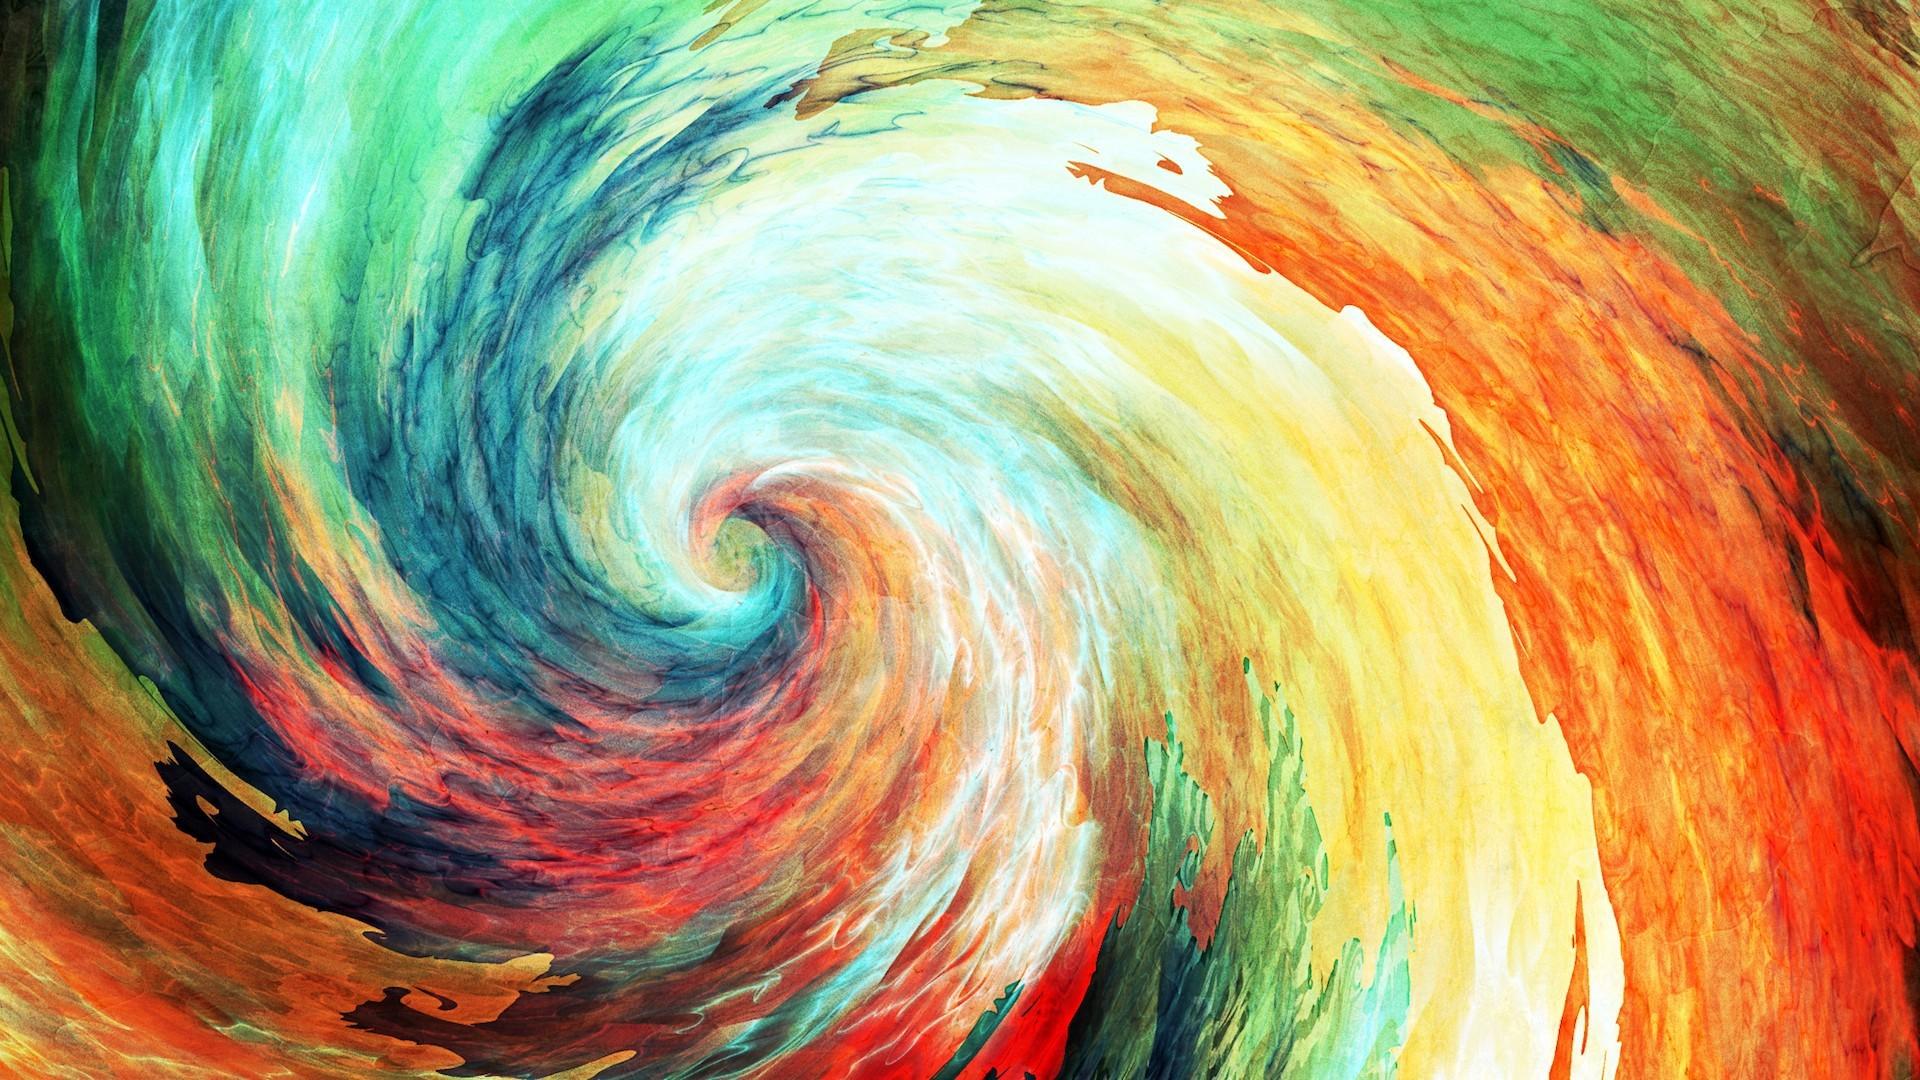 #painting, #spiral, #colorful, #abstract wallpaper